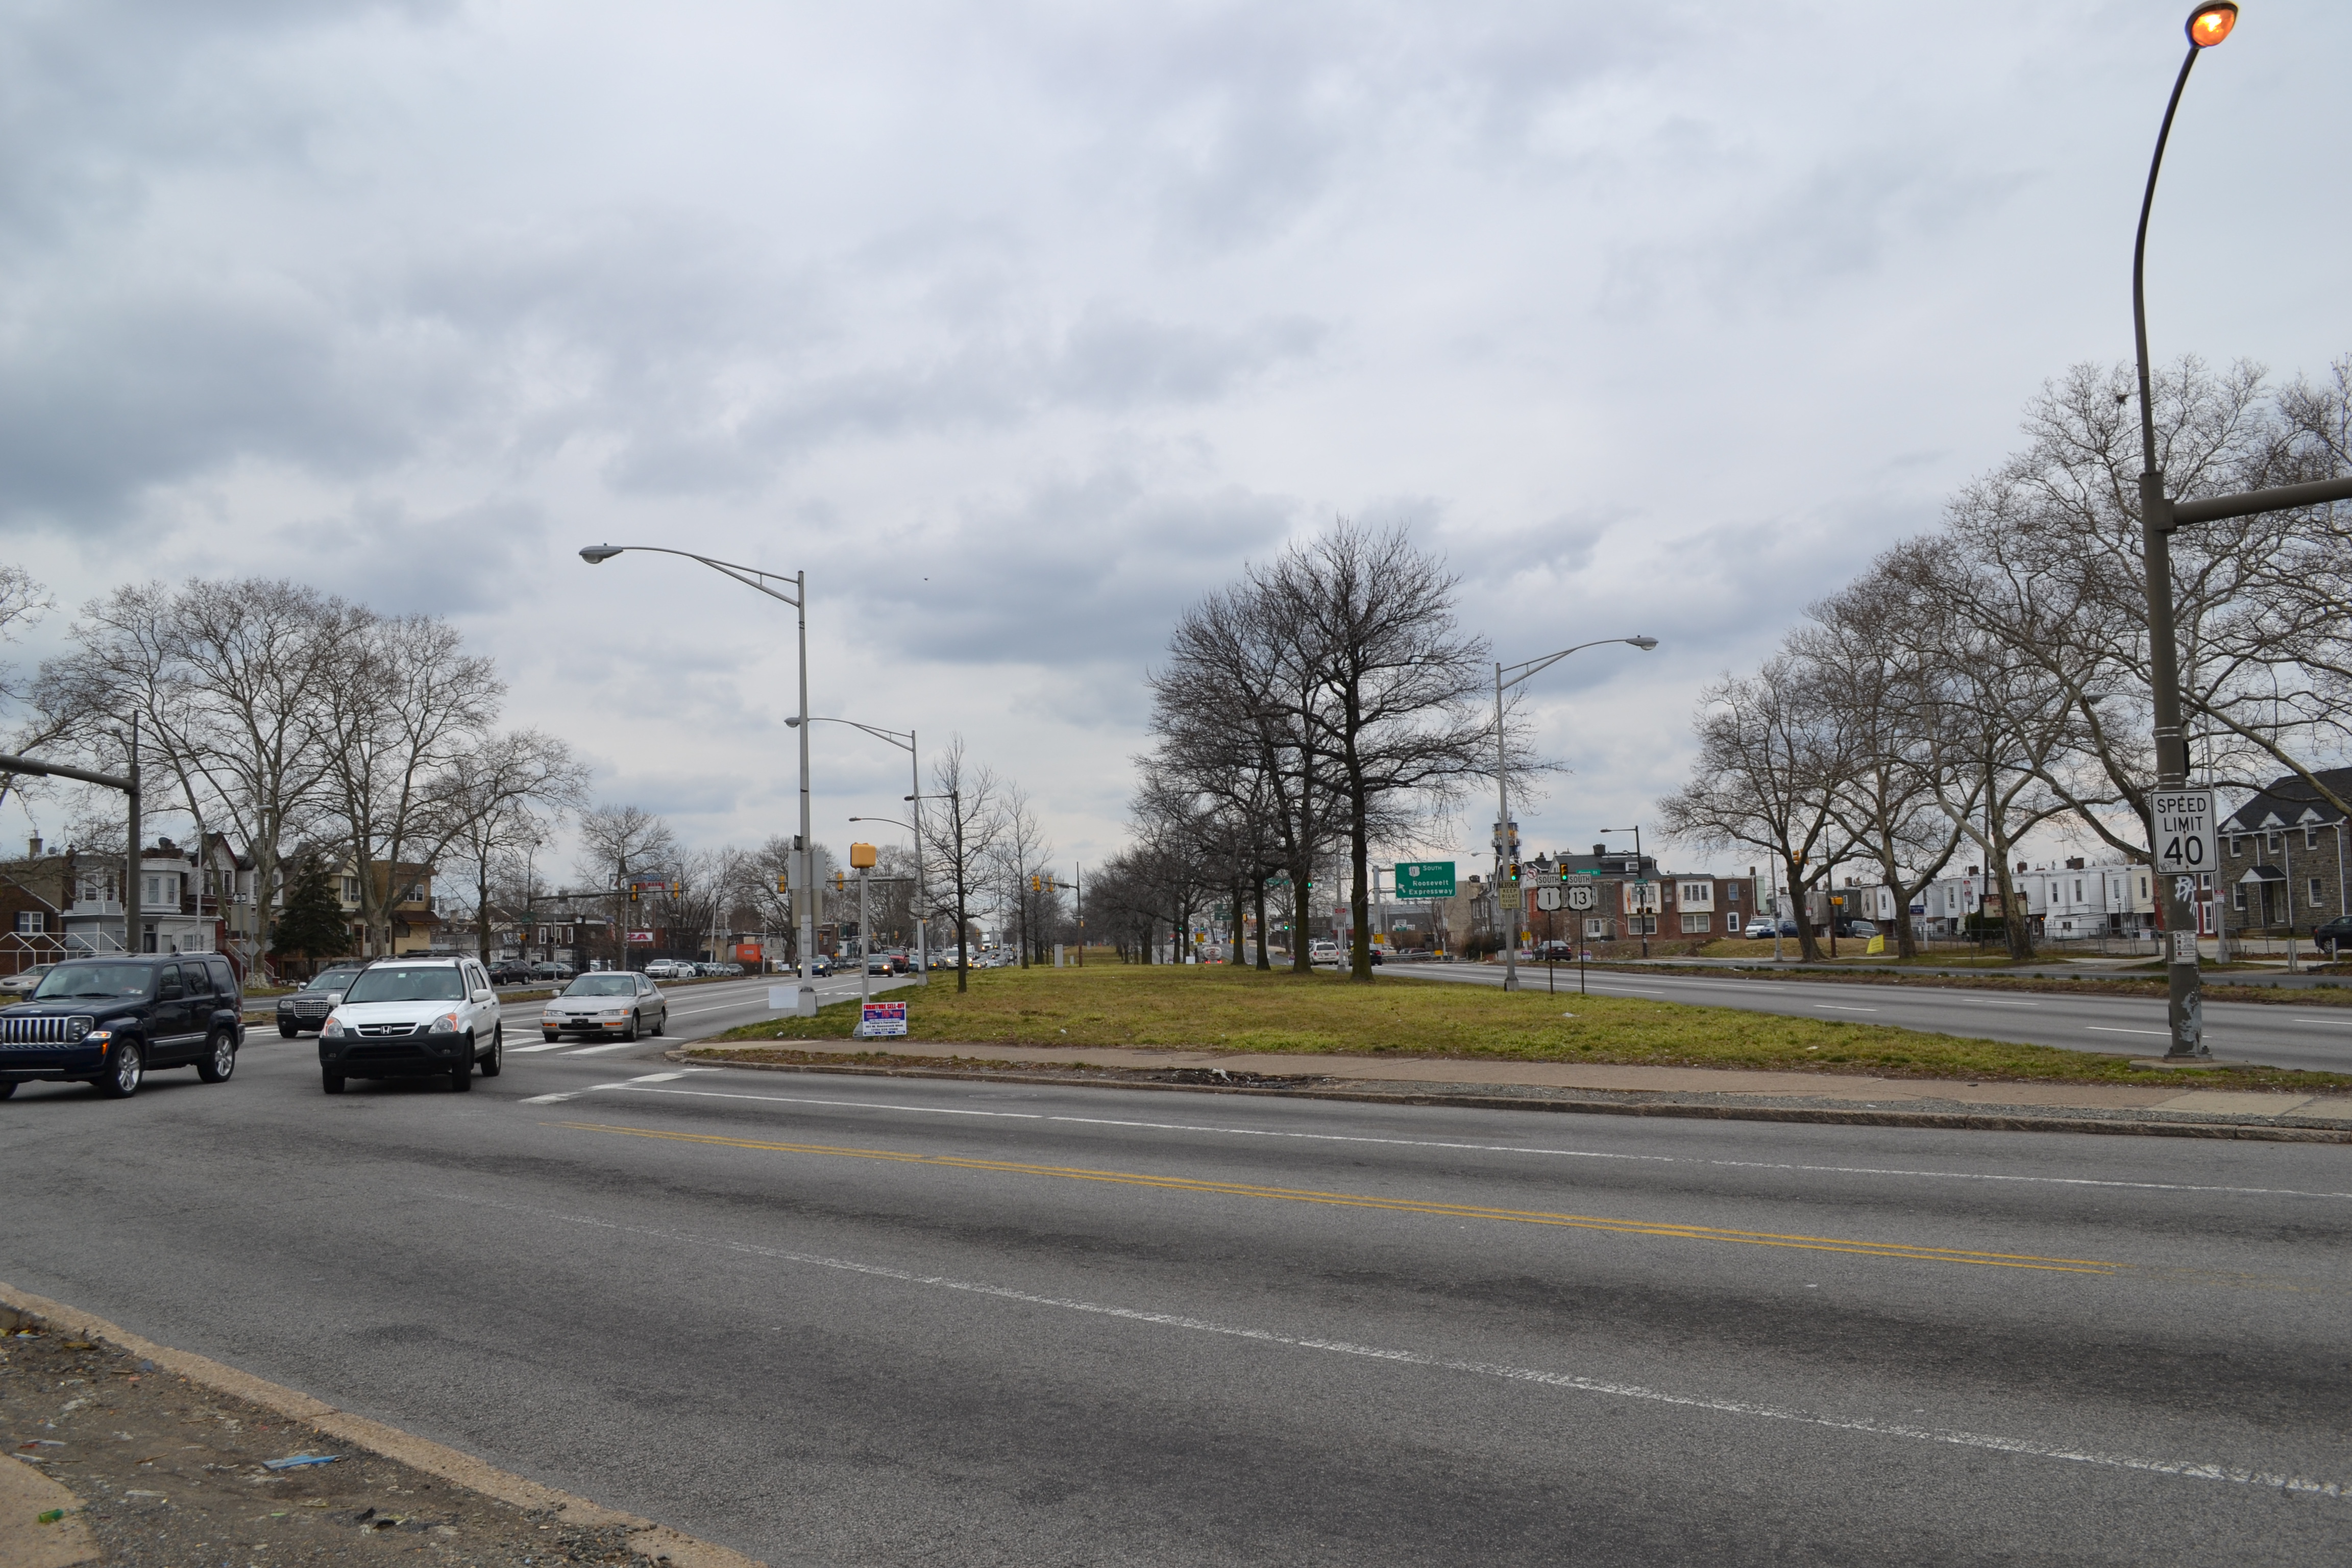 The 12-lane Boulevard has an 80-foot-wide central median